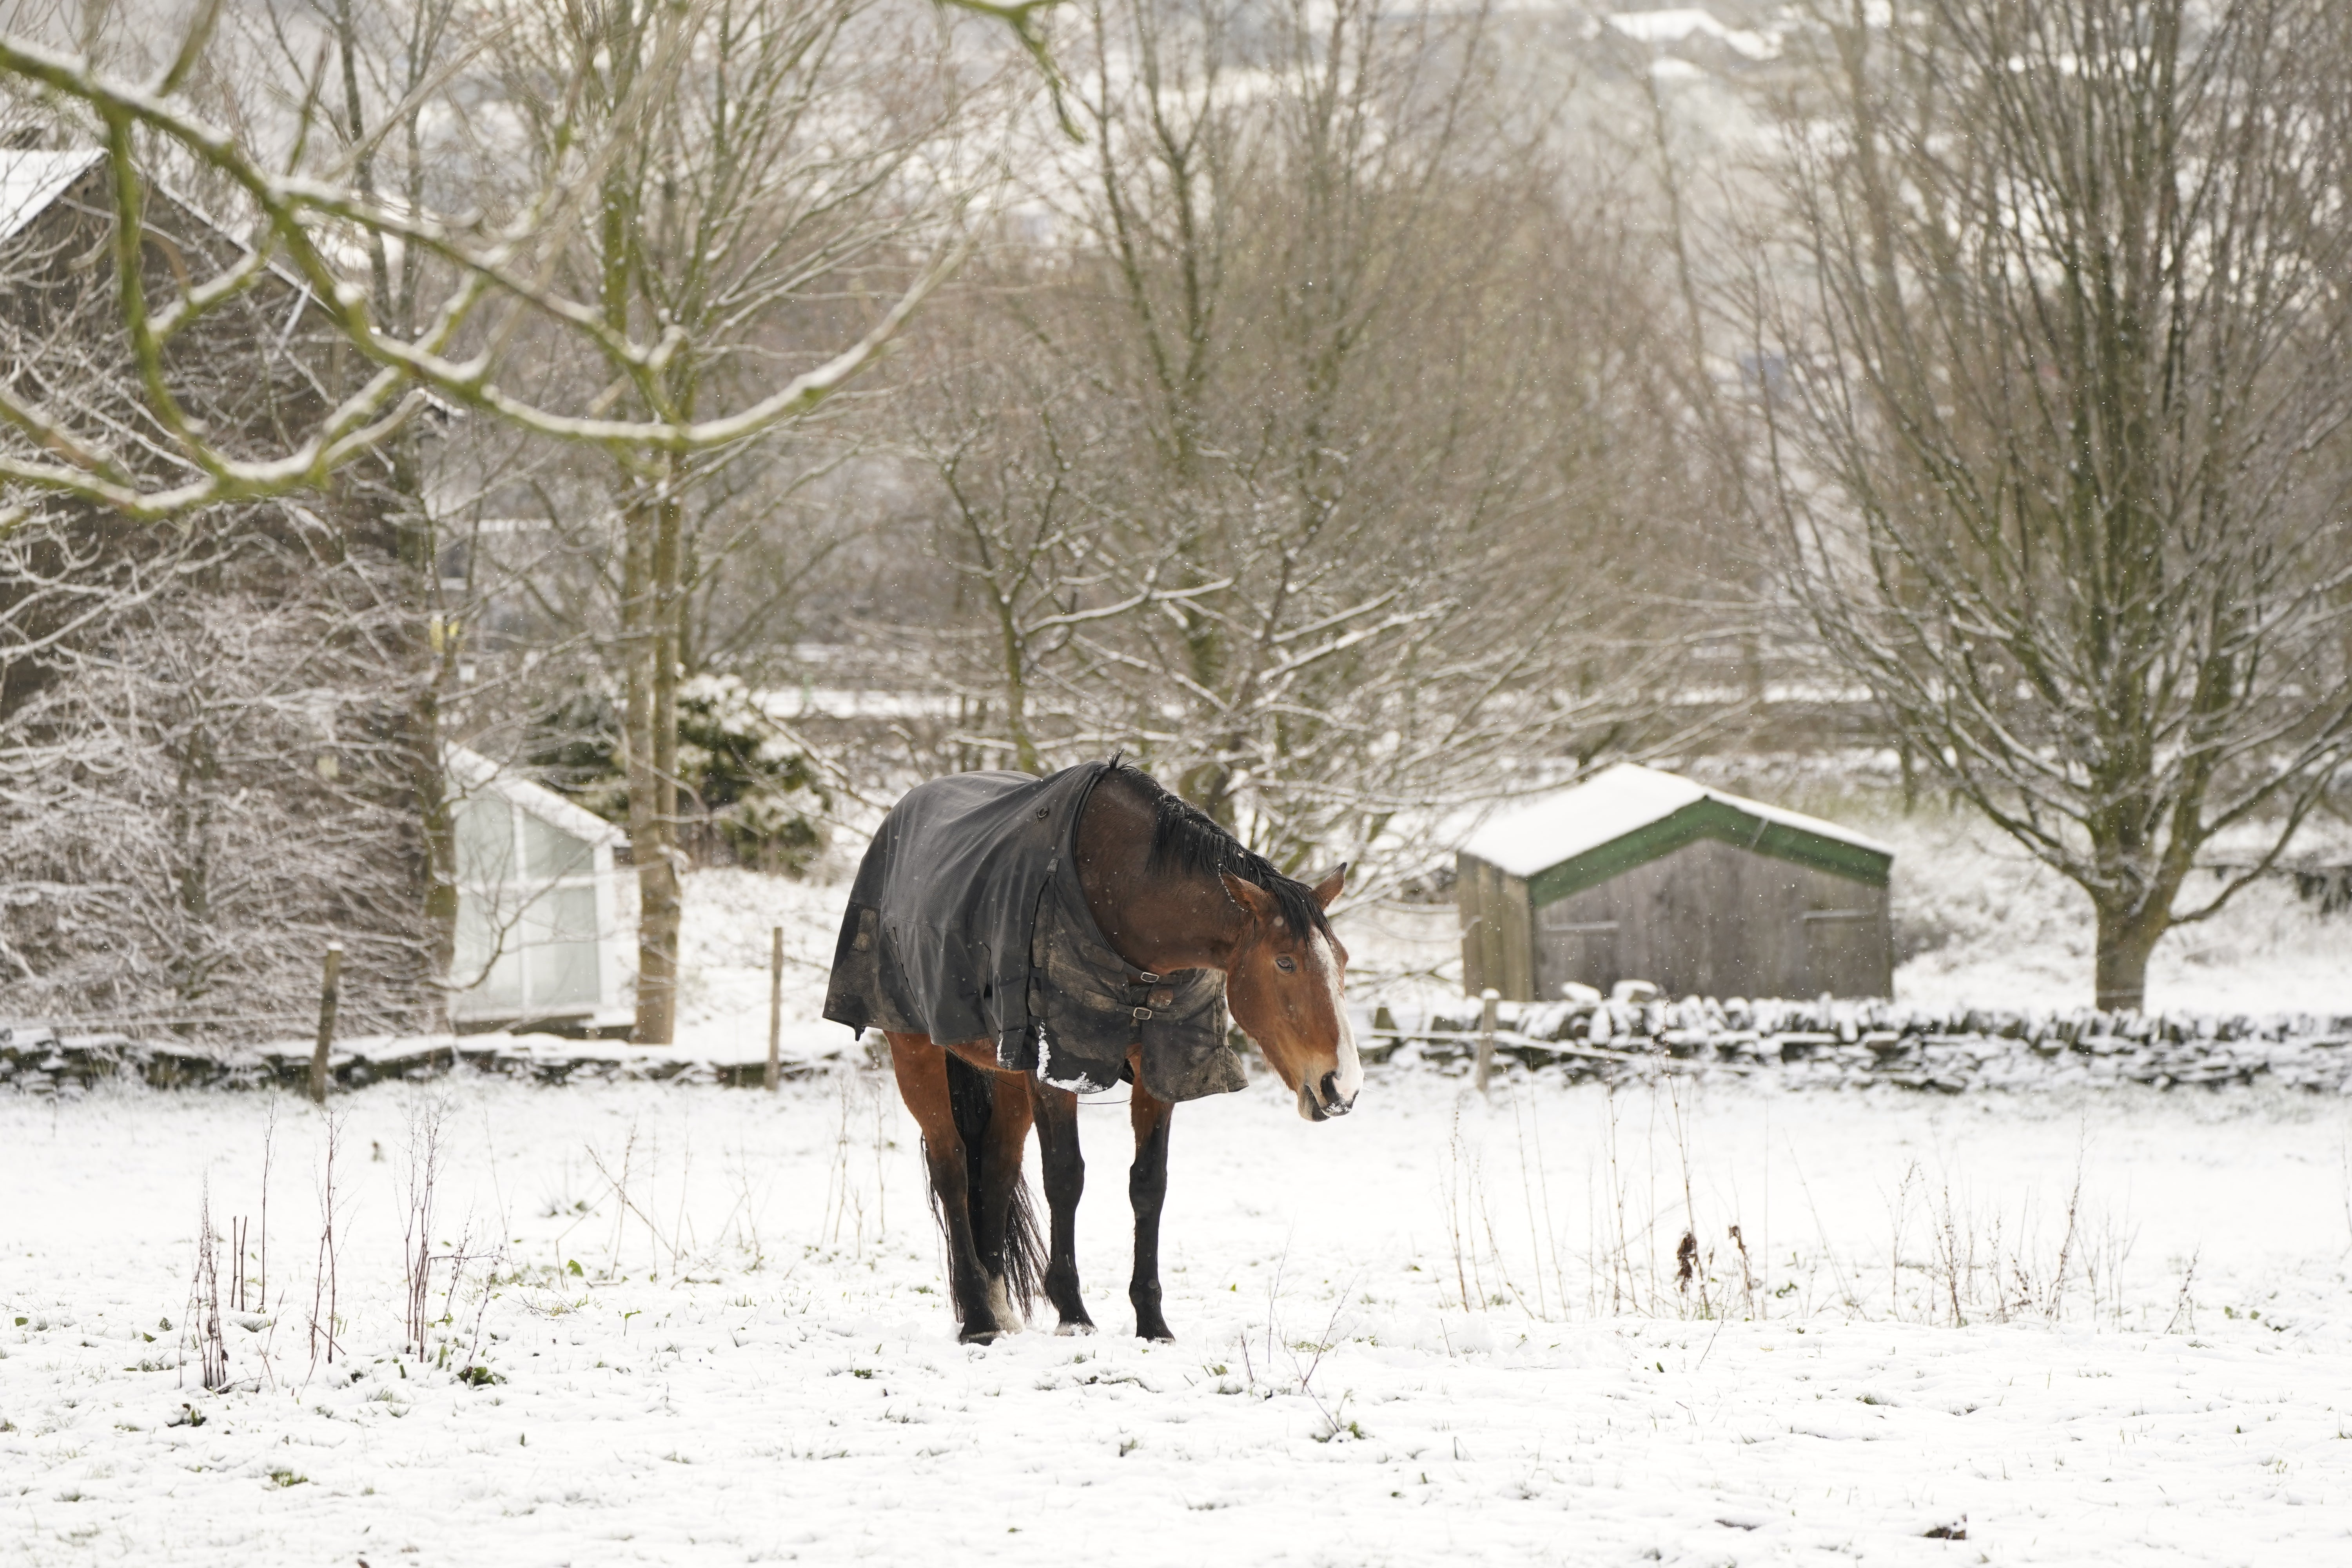 A horse in a snowy field in Outlane village in Kirklees, West Yorkshire (Danny Lawson/PA)